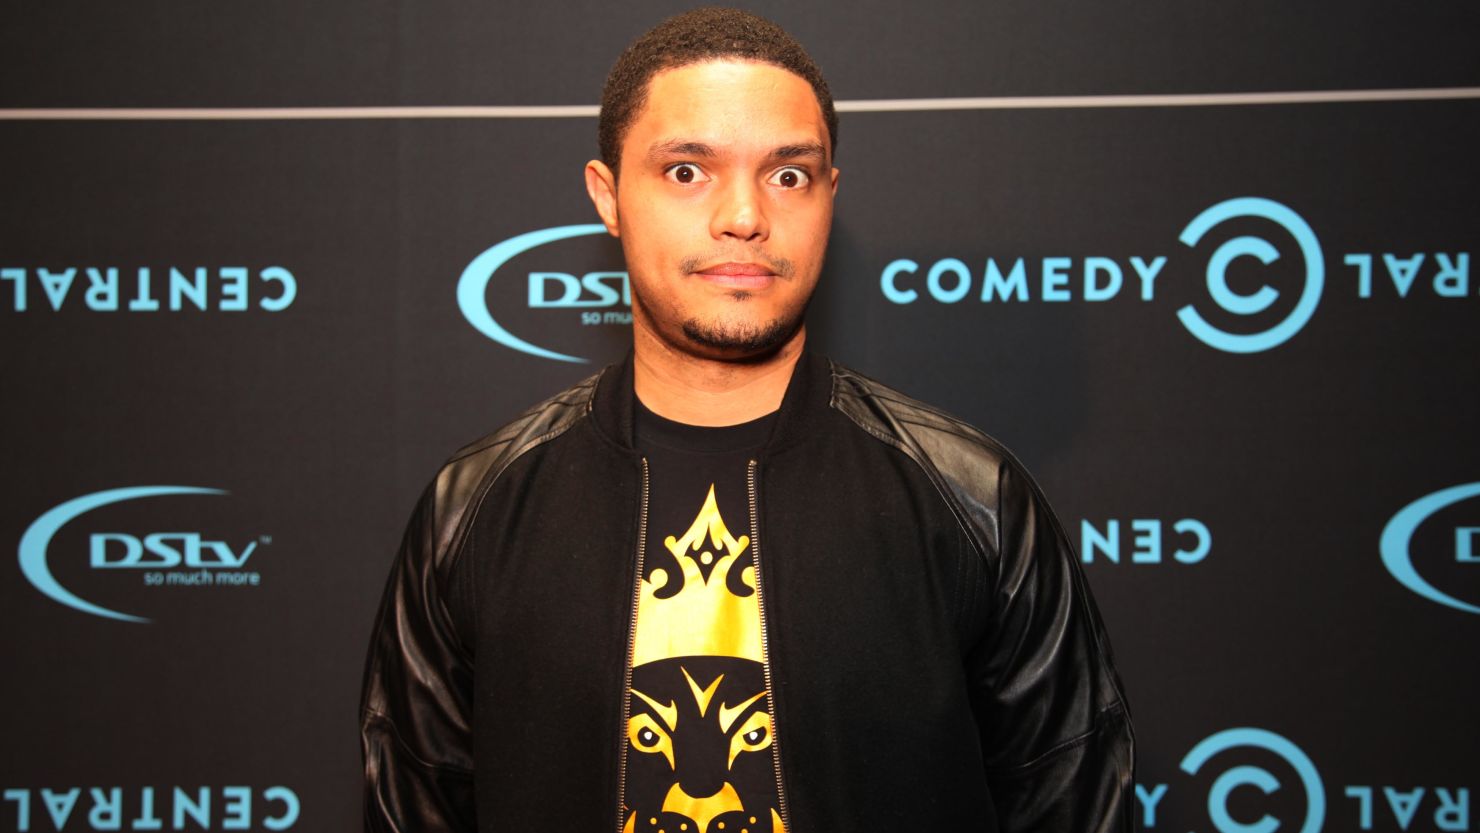 Trevor Noah, 31, will replace Jon Stewart as the host of "The Daily Show."